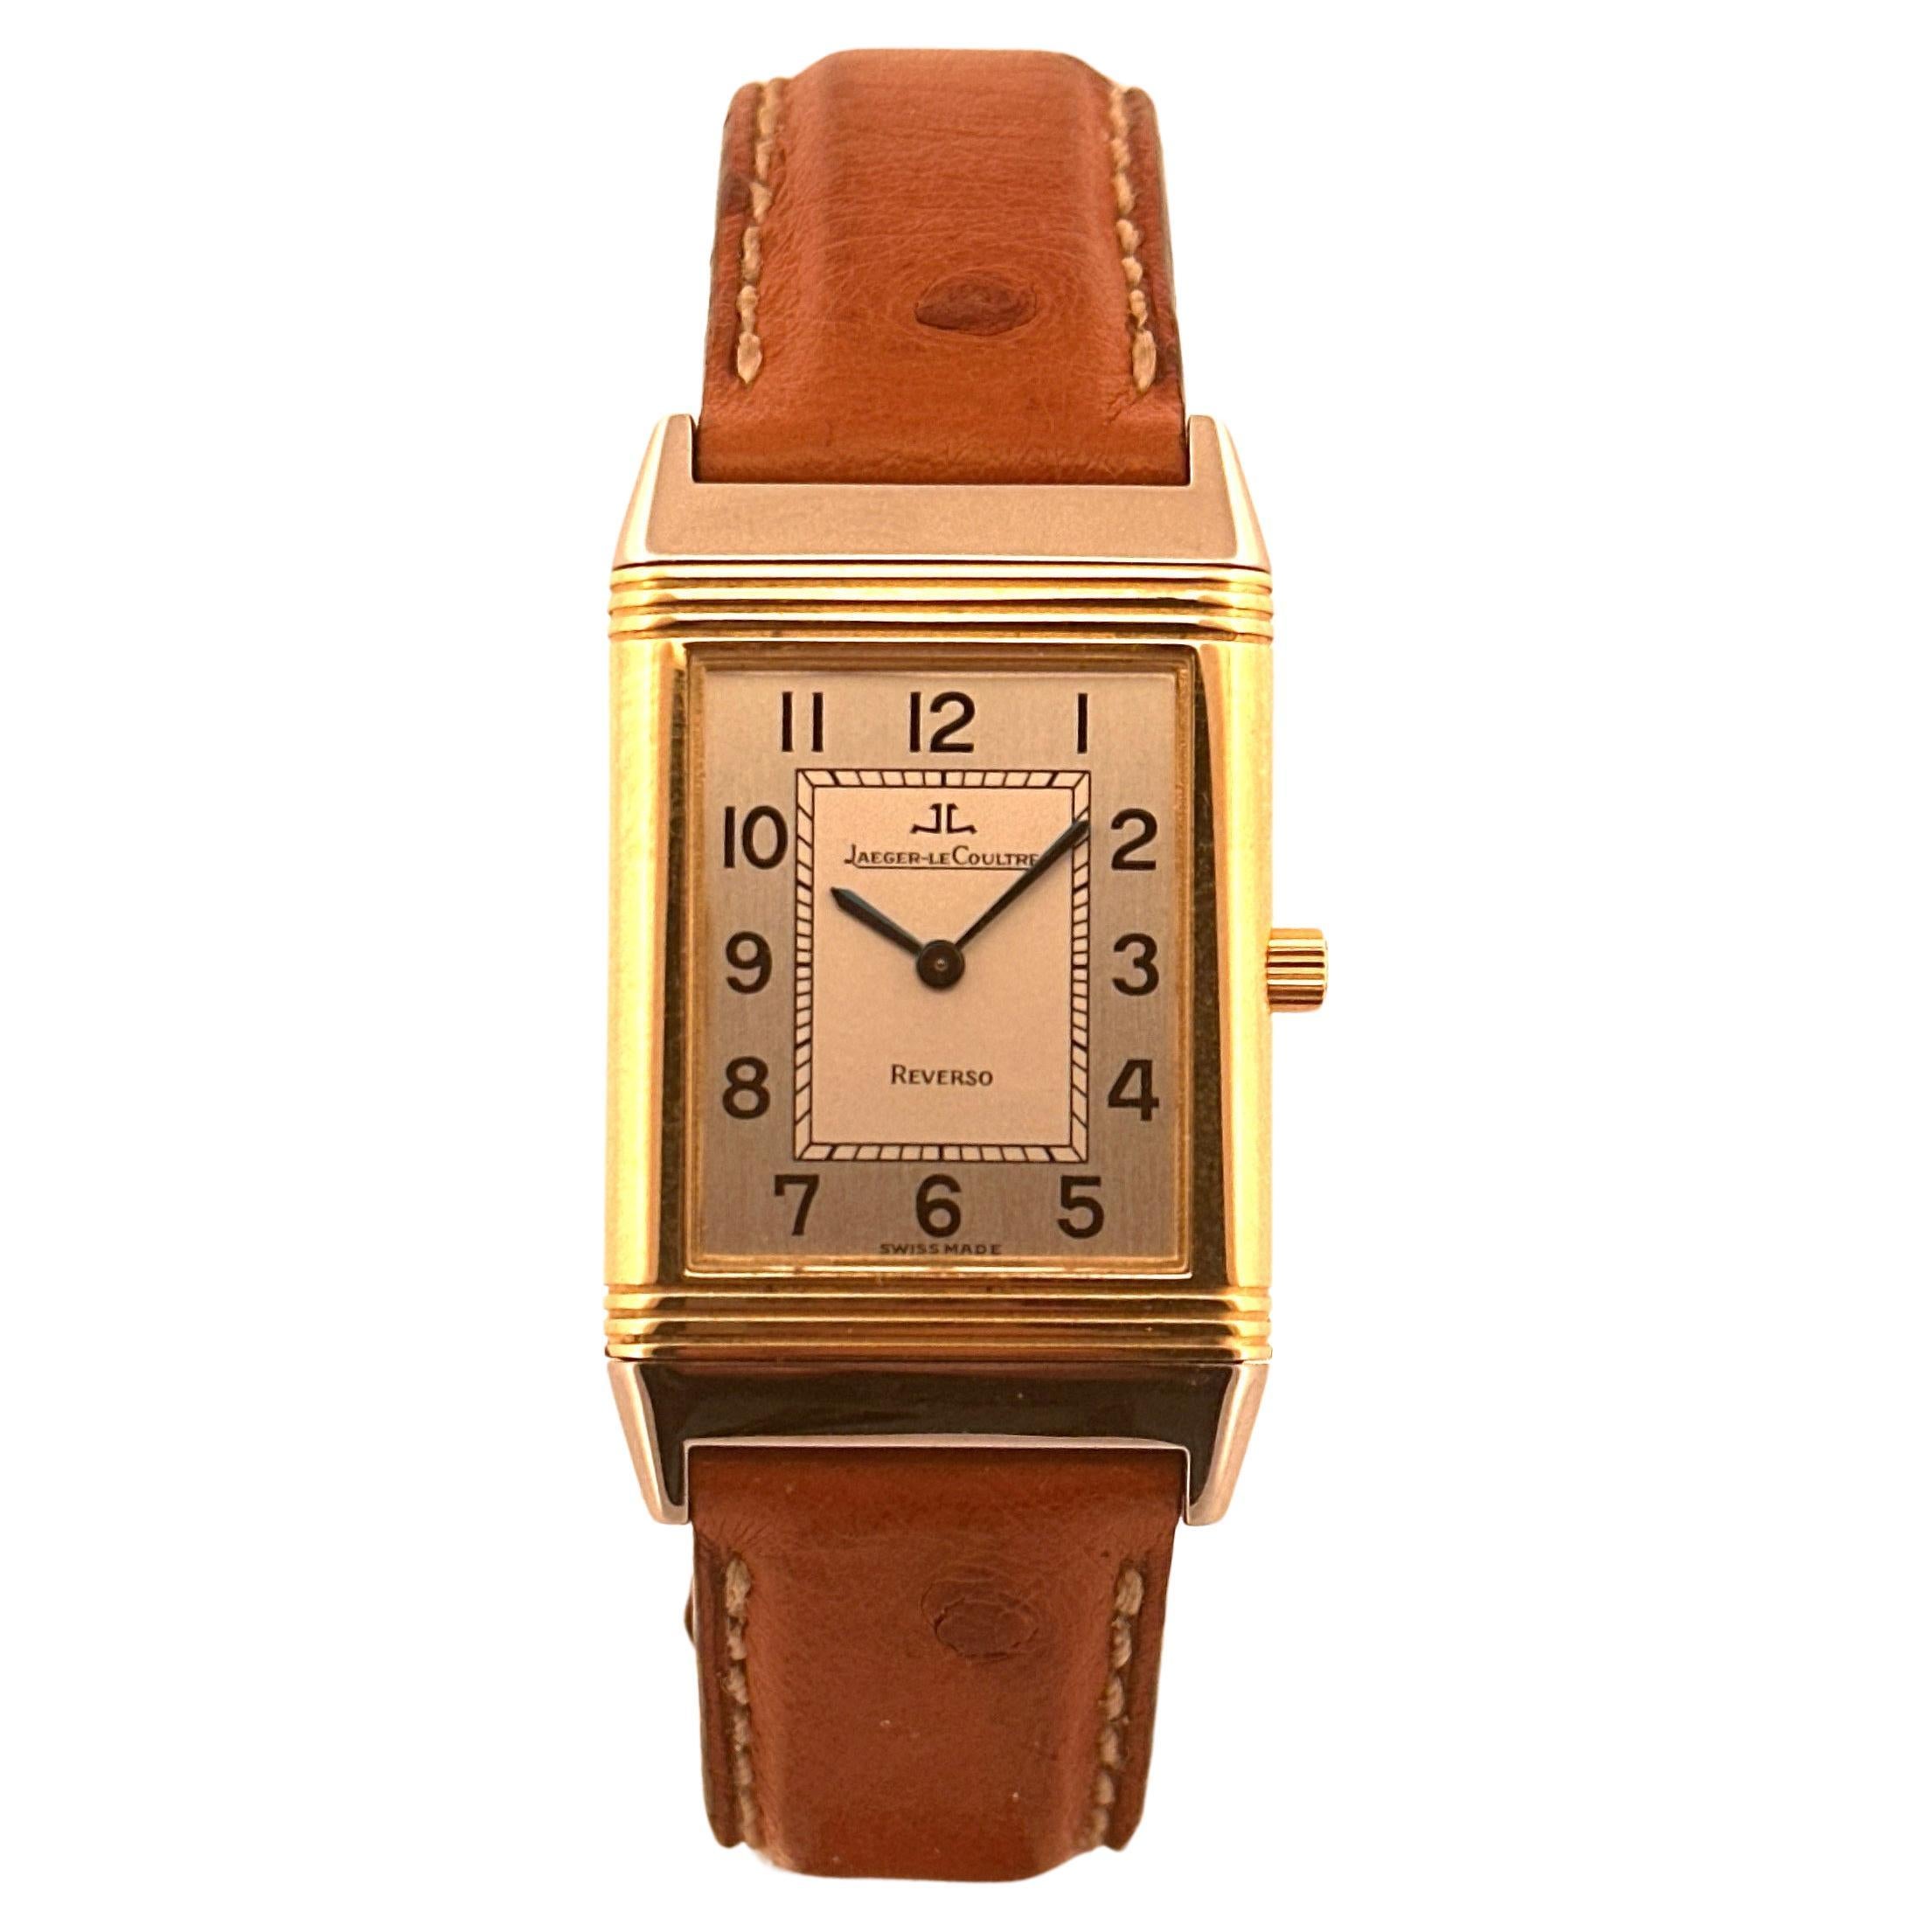 Jaeger leCoultre Reverso watch 250.5.86